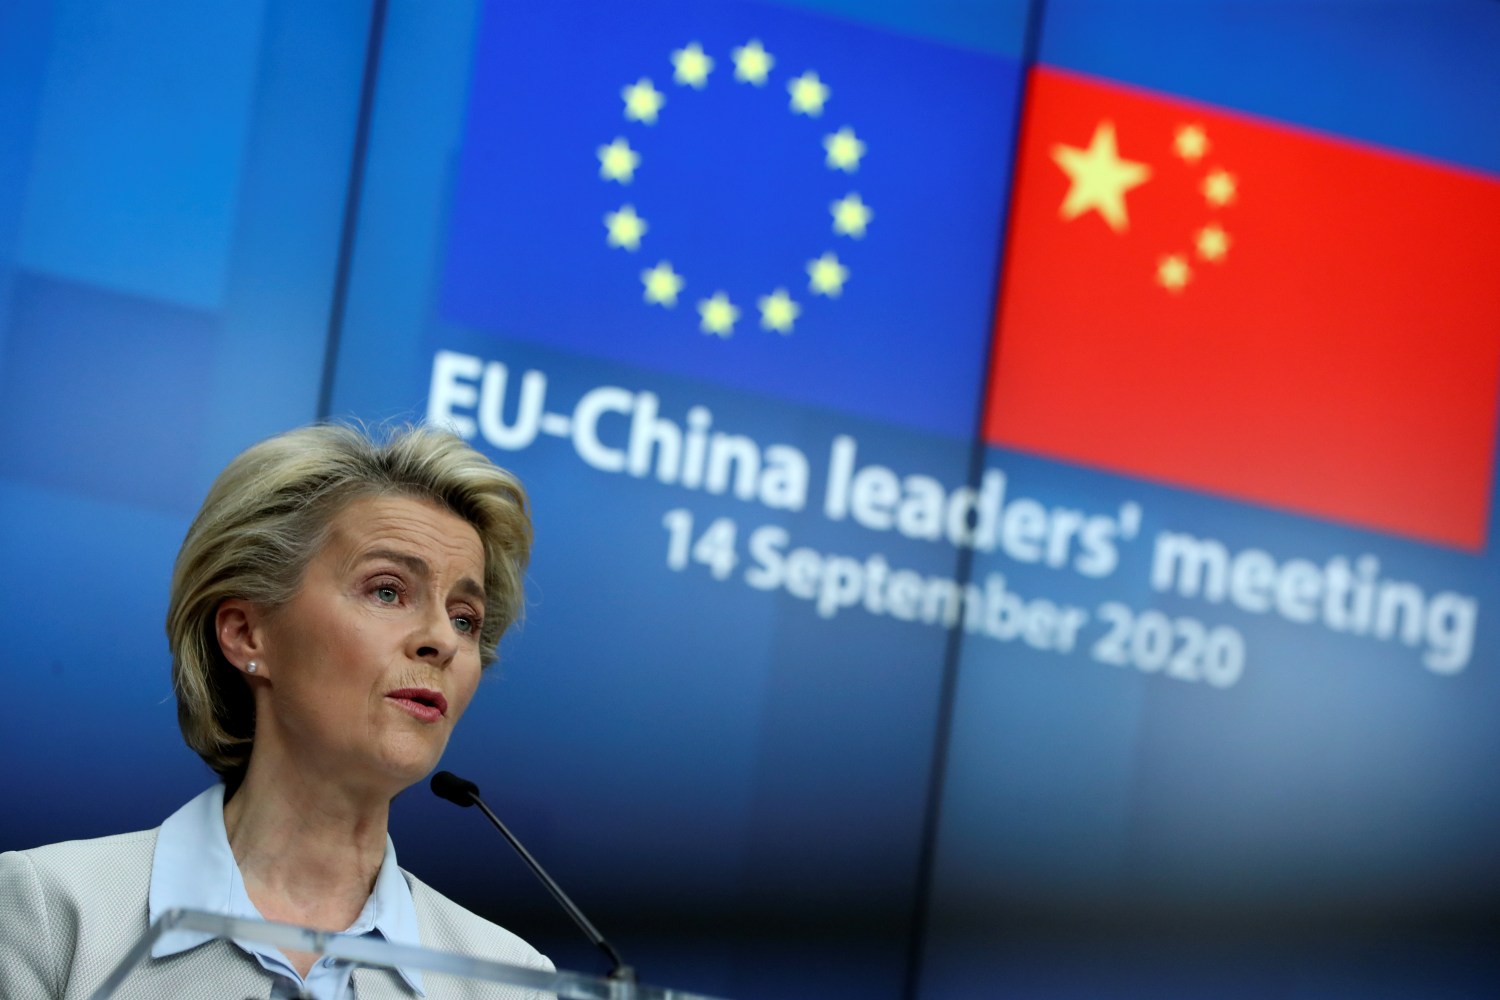 European Commission President Ursula von der Leyen and European Council President Charles Michel (not pictured), connected via video with German Chancellor Angela Merkel, hold a news conference after a virtual summit with China's President Xi Jinping, in Brussels, Belgium, September 14, 2020. REUTERS/Yves Herman/Pool